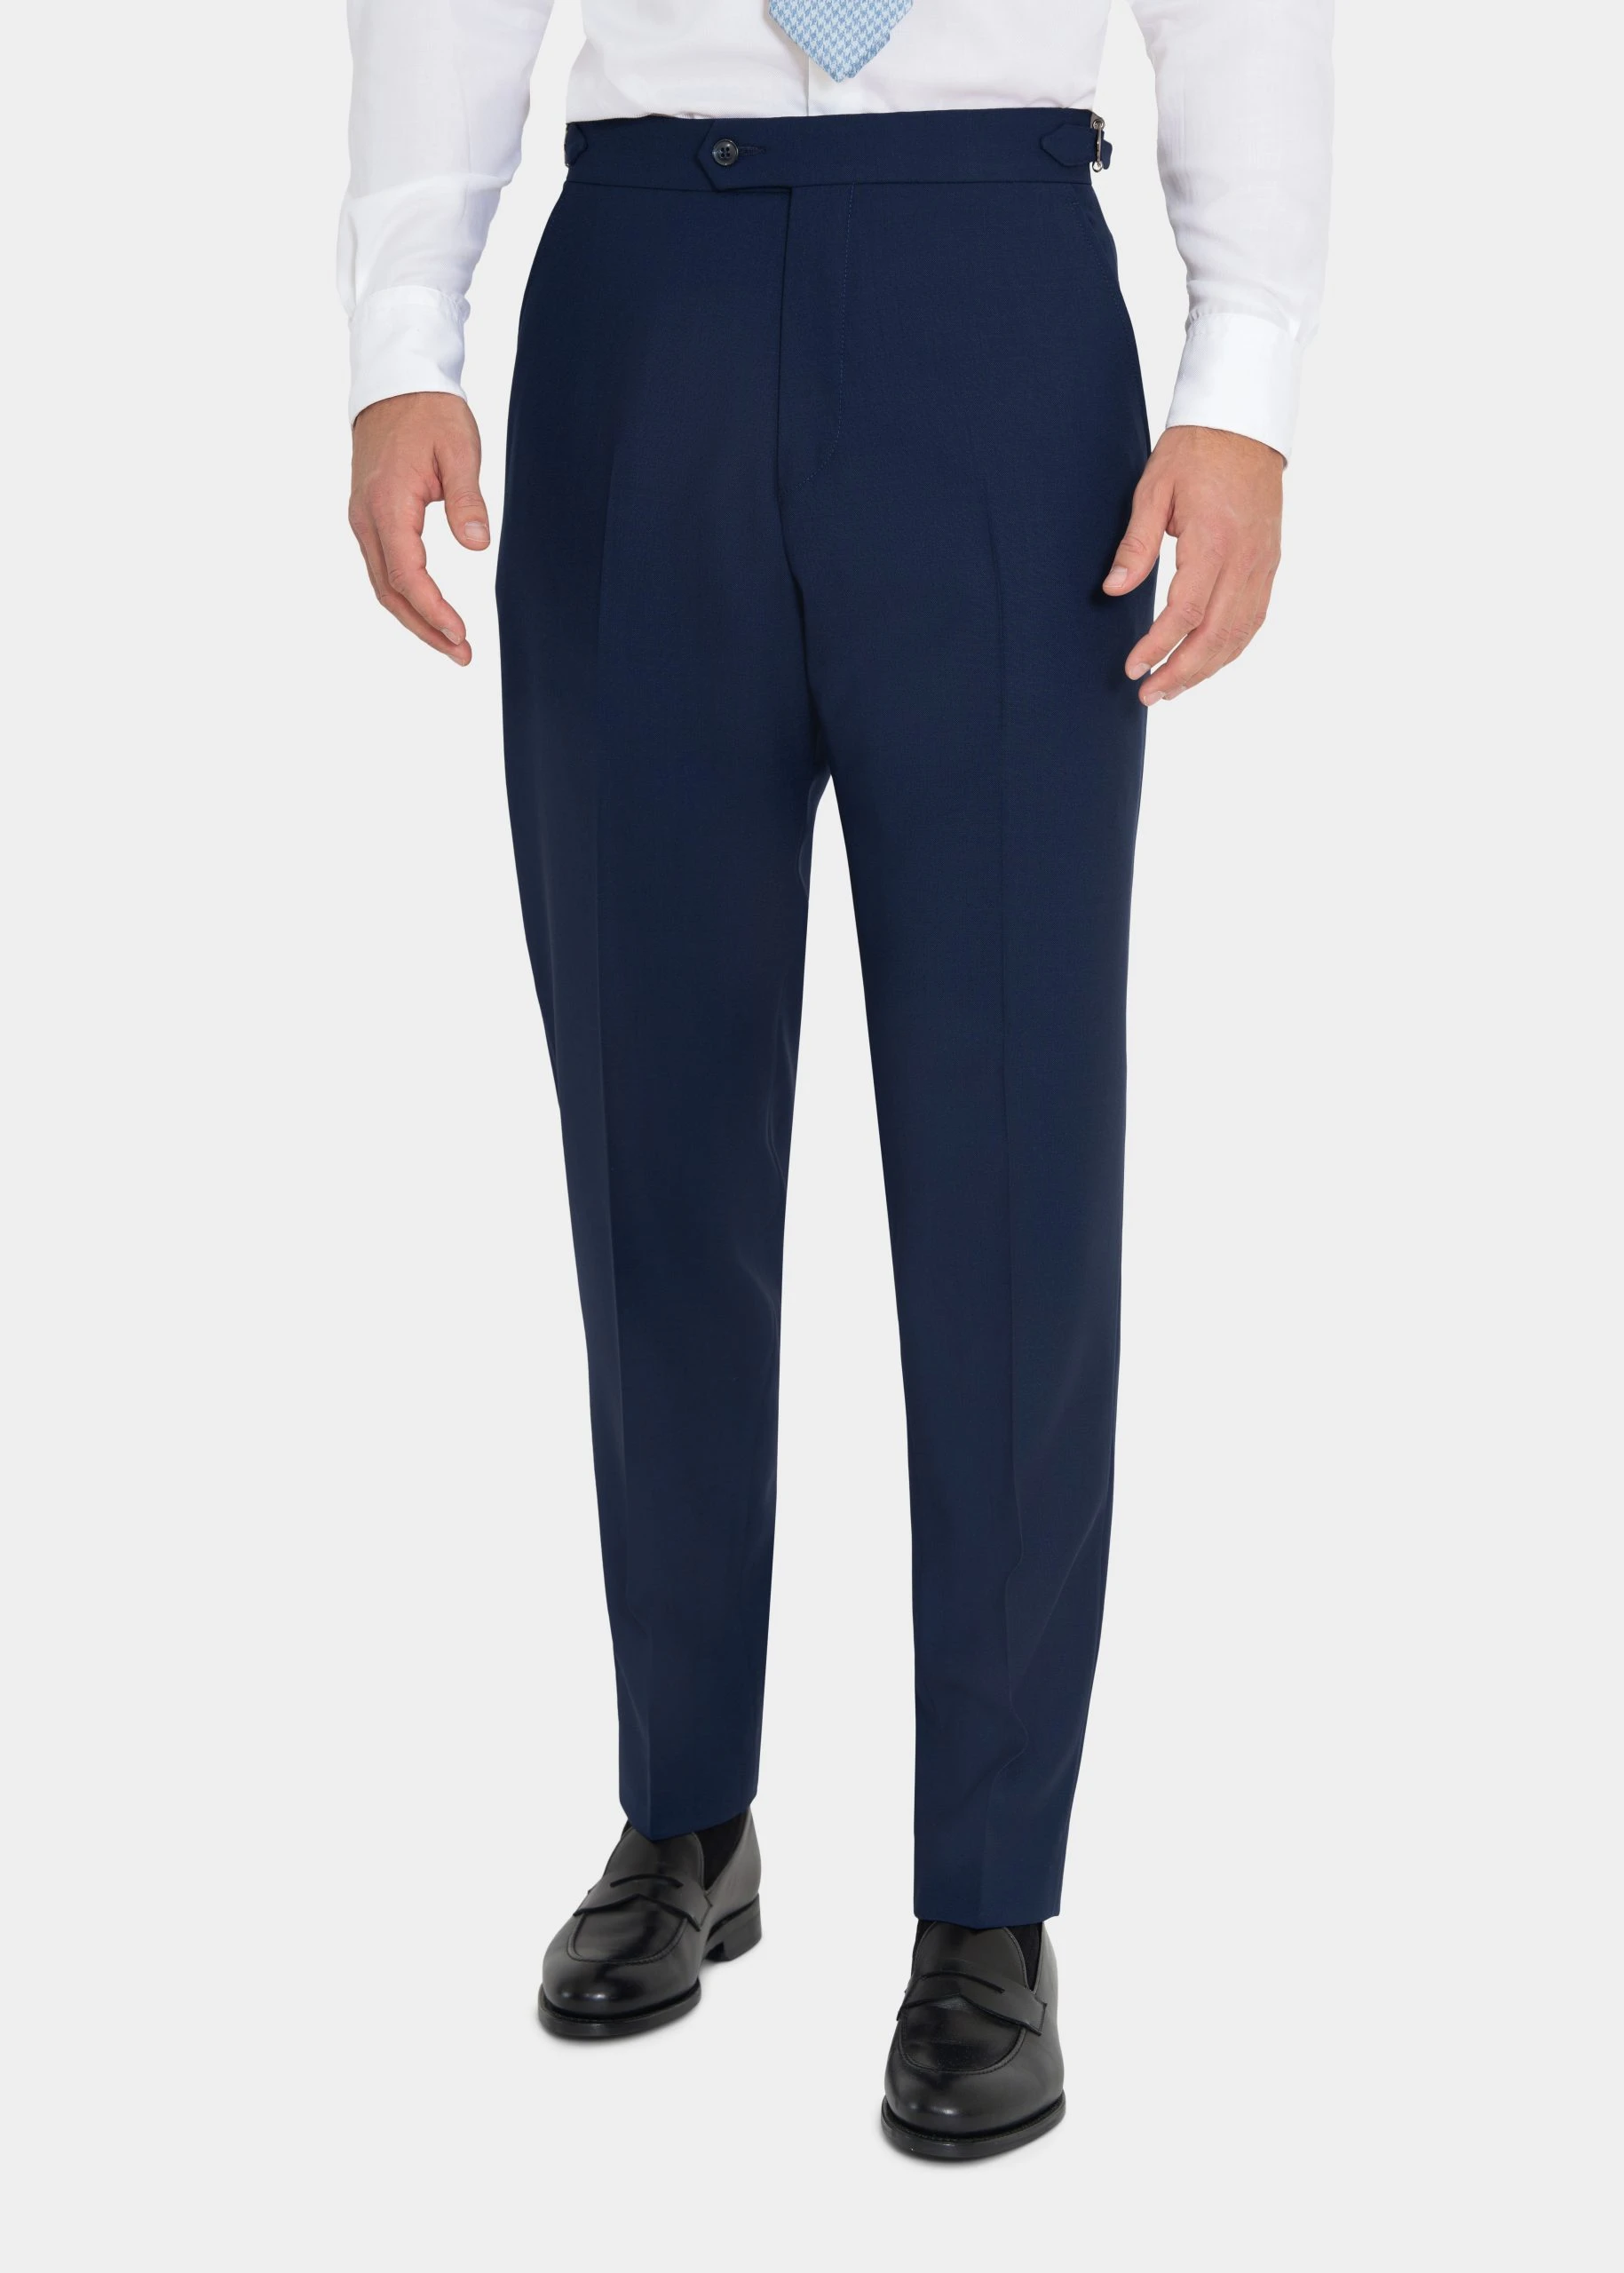 blue suit trousers in twistair fabric